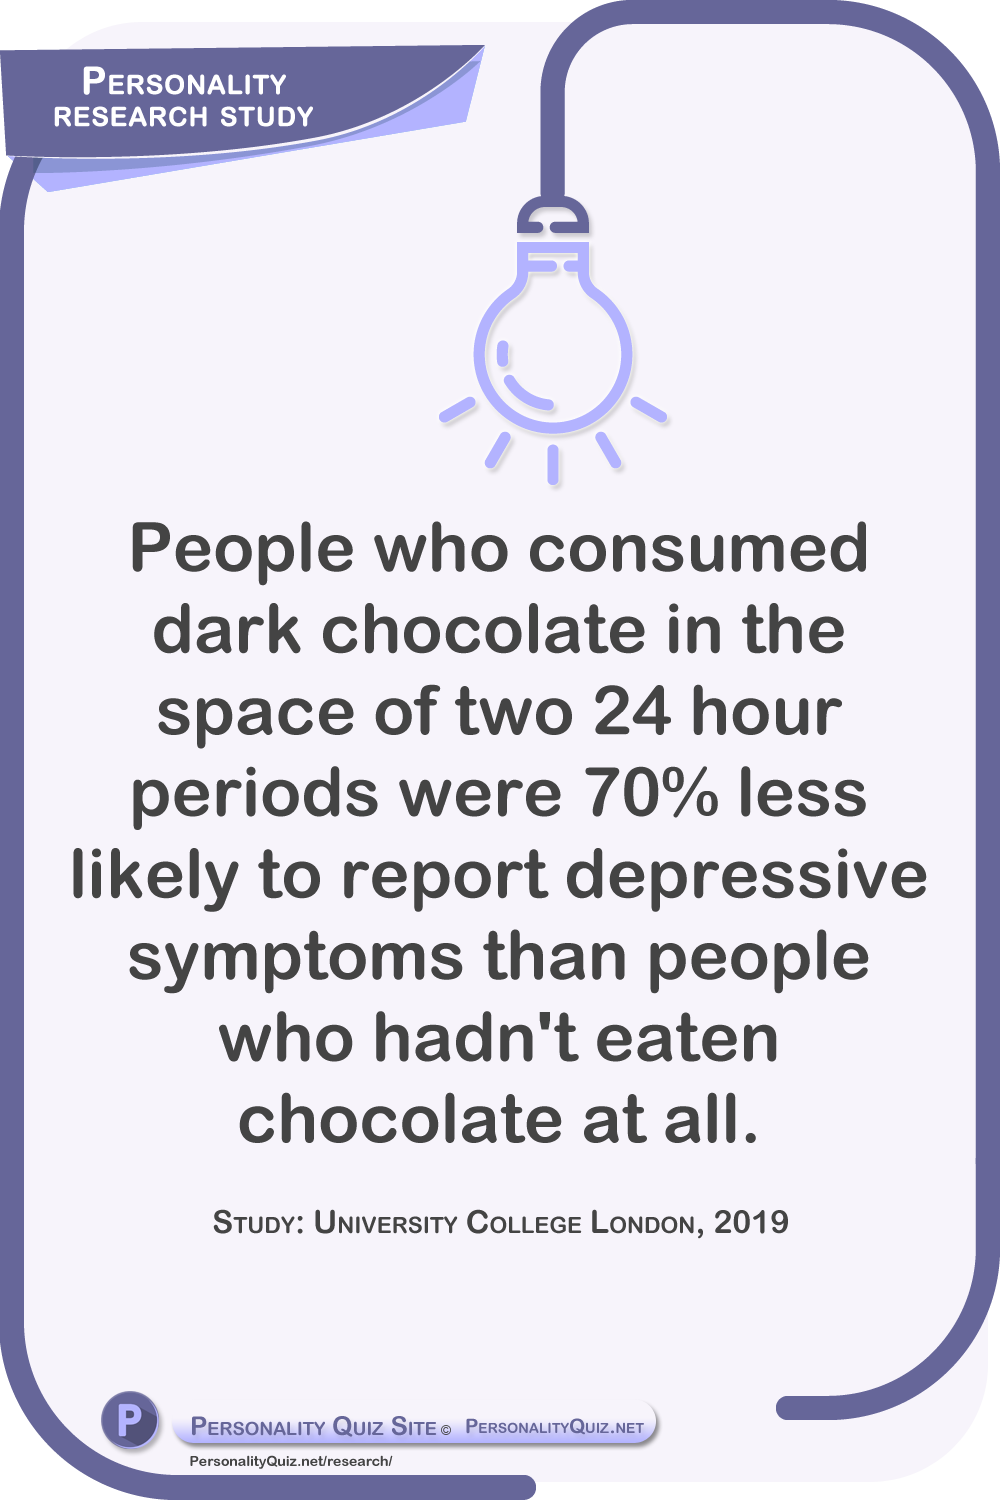 People who consumed dark chocolate in the space of two 24 hour periods were 70% less likely to report depressive symptoms than people who hadn't eaten chocolate at all. Study: University College London, 2019